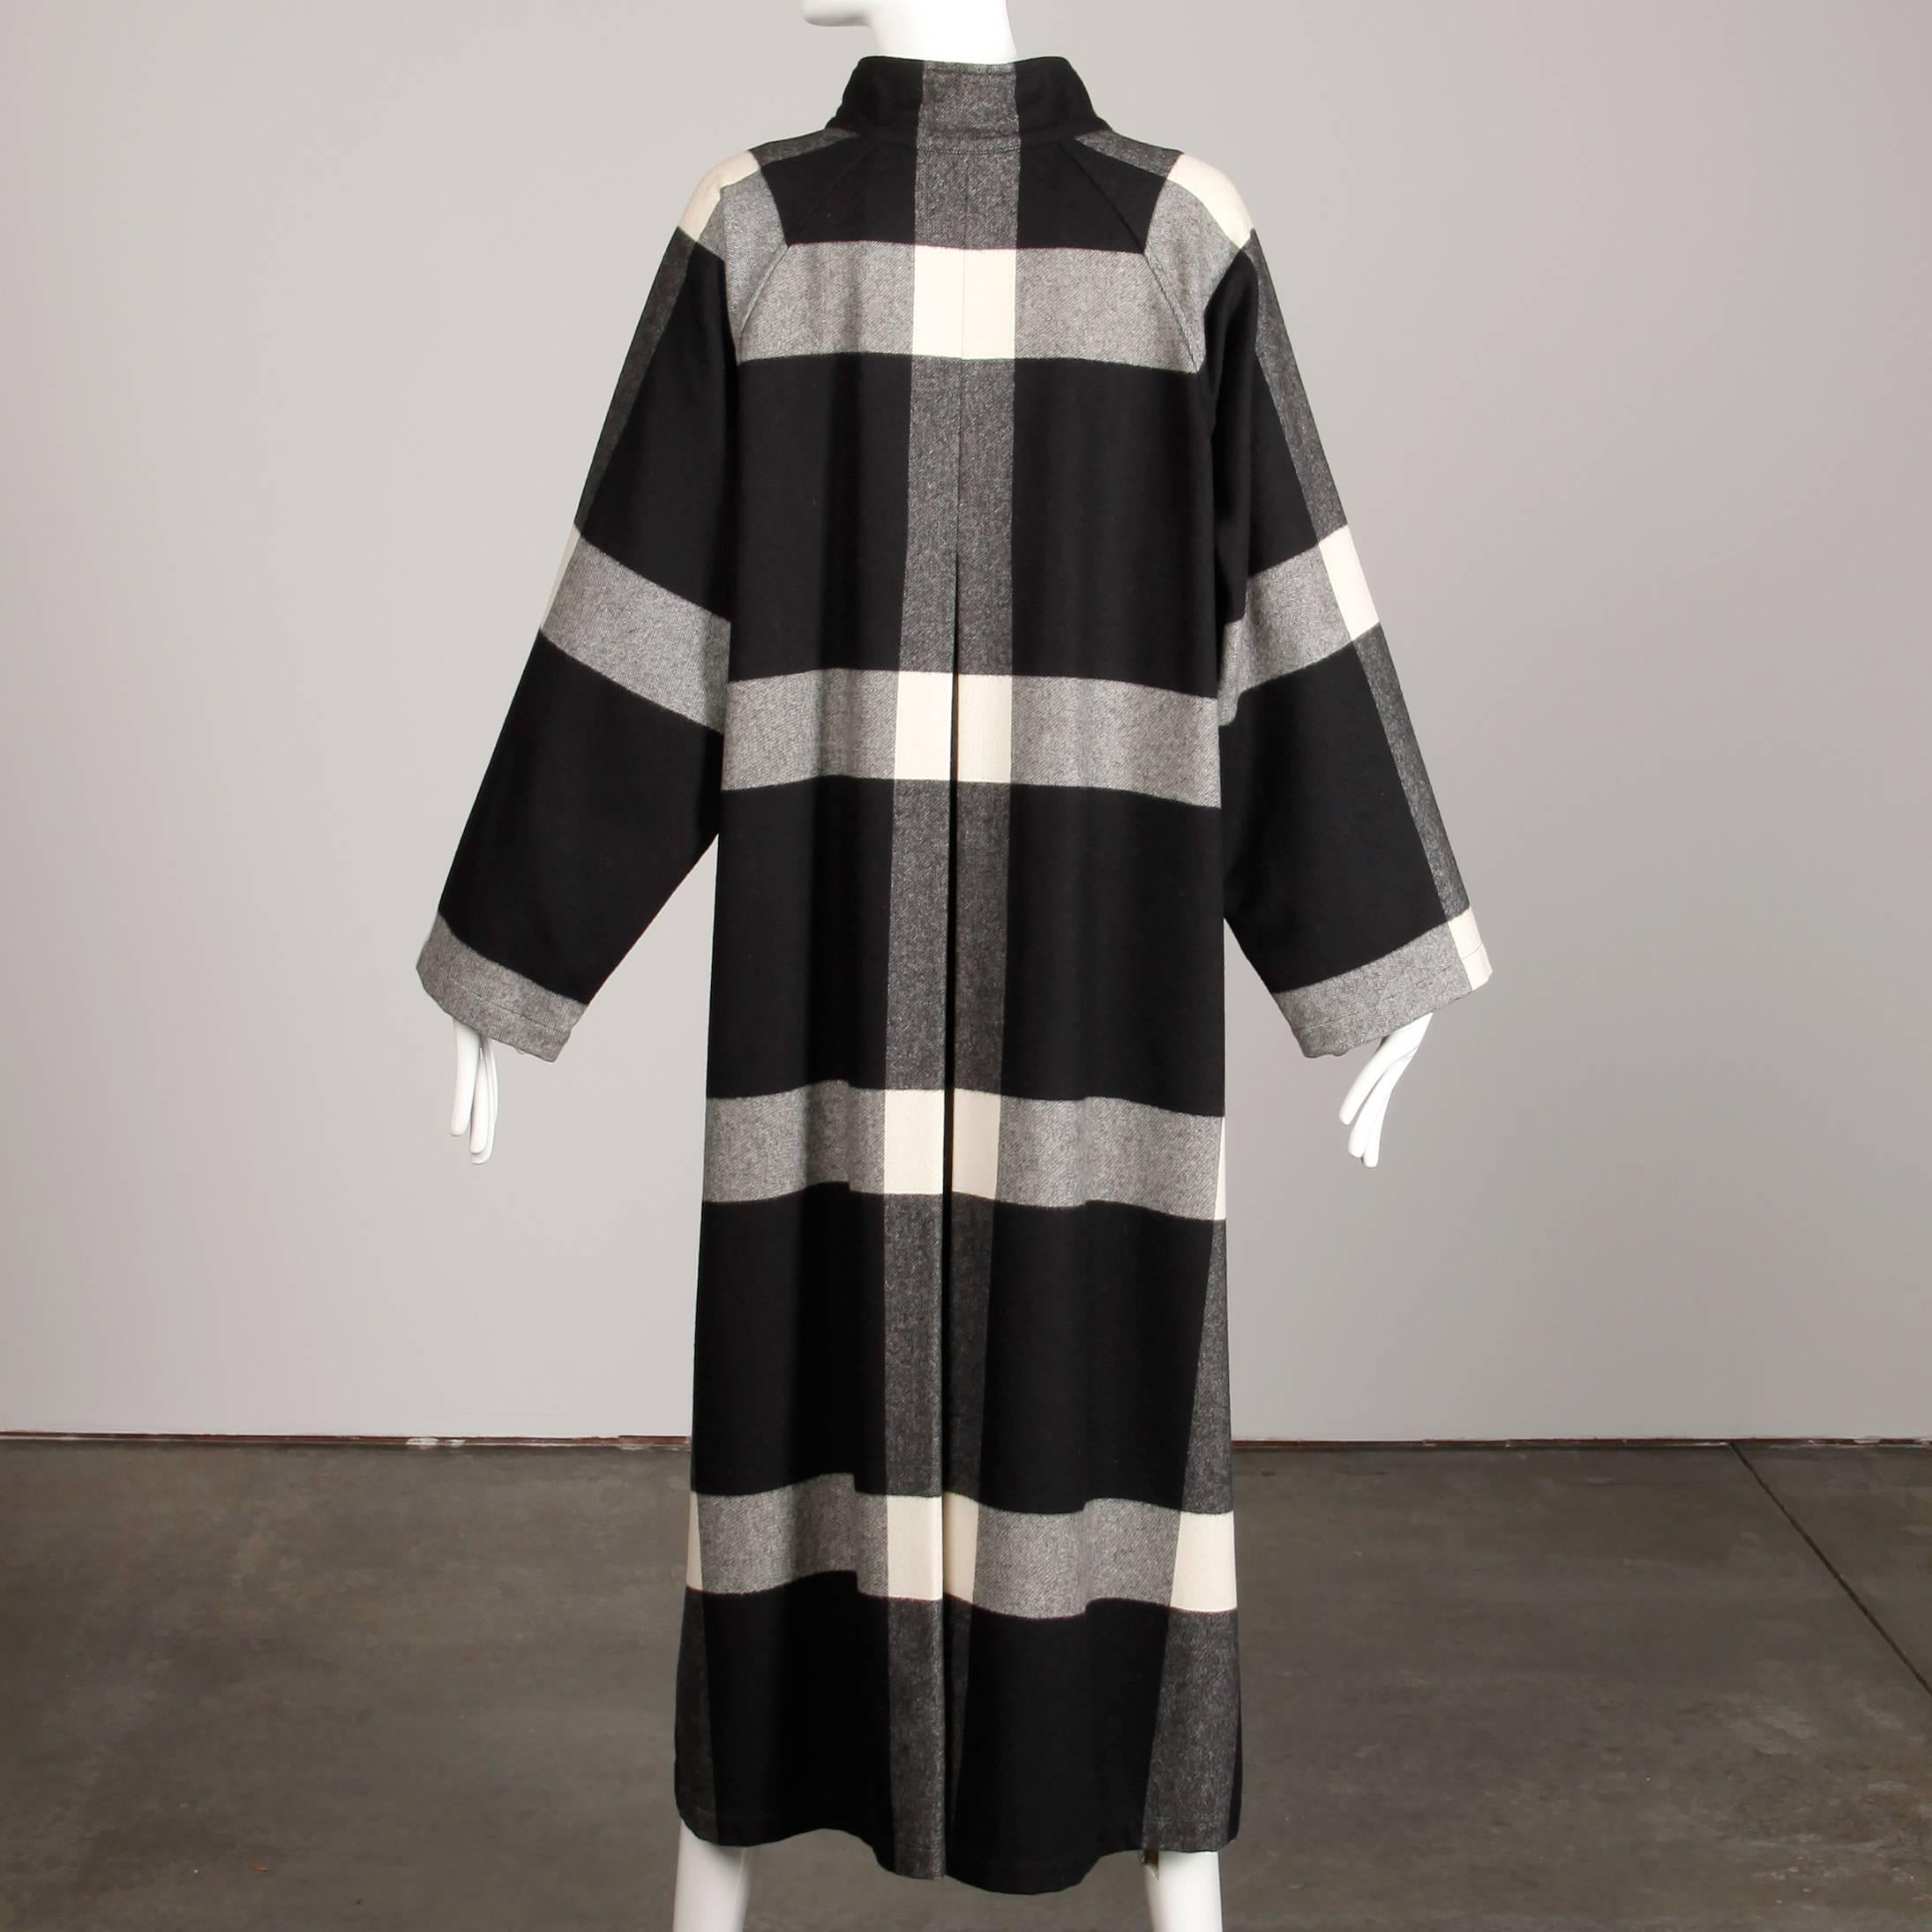 1980s Michaele Vollbracht Vintage Cashmere Wool Plaid Coat Dress or Duster In Excellent Condition For Sale In Sparks, NV